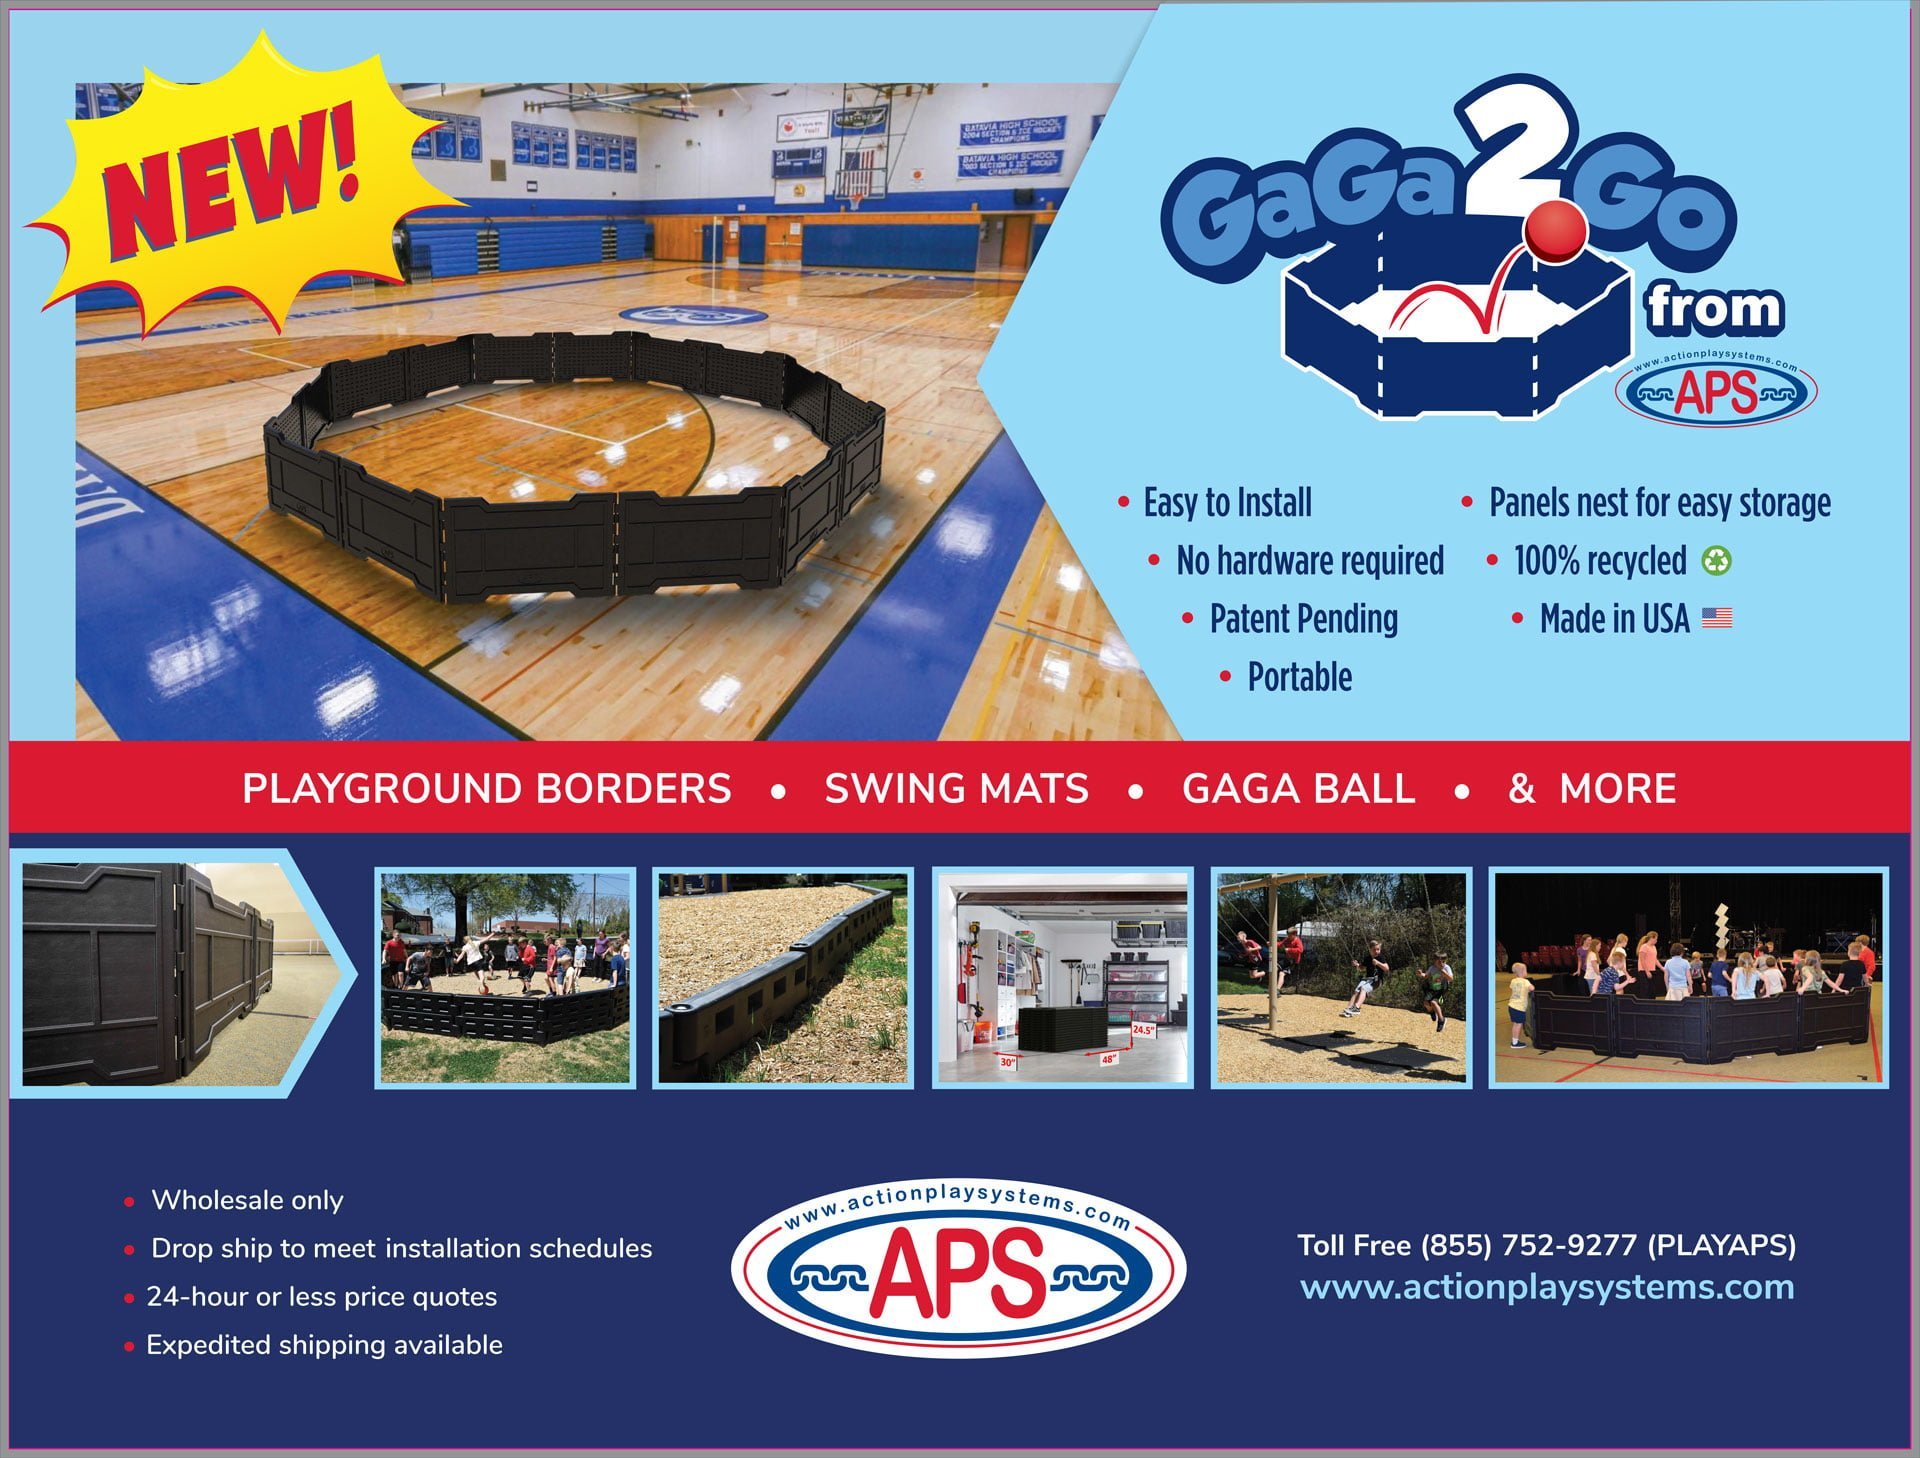 horizontal banner created for GaGa2Go from Action Play Systems